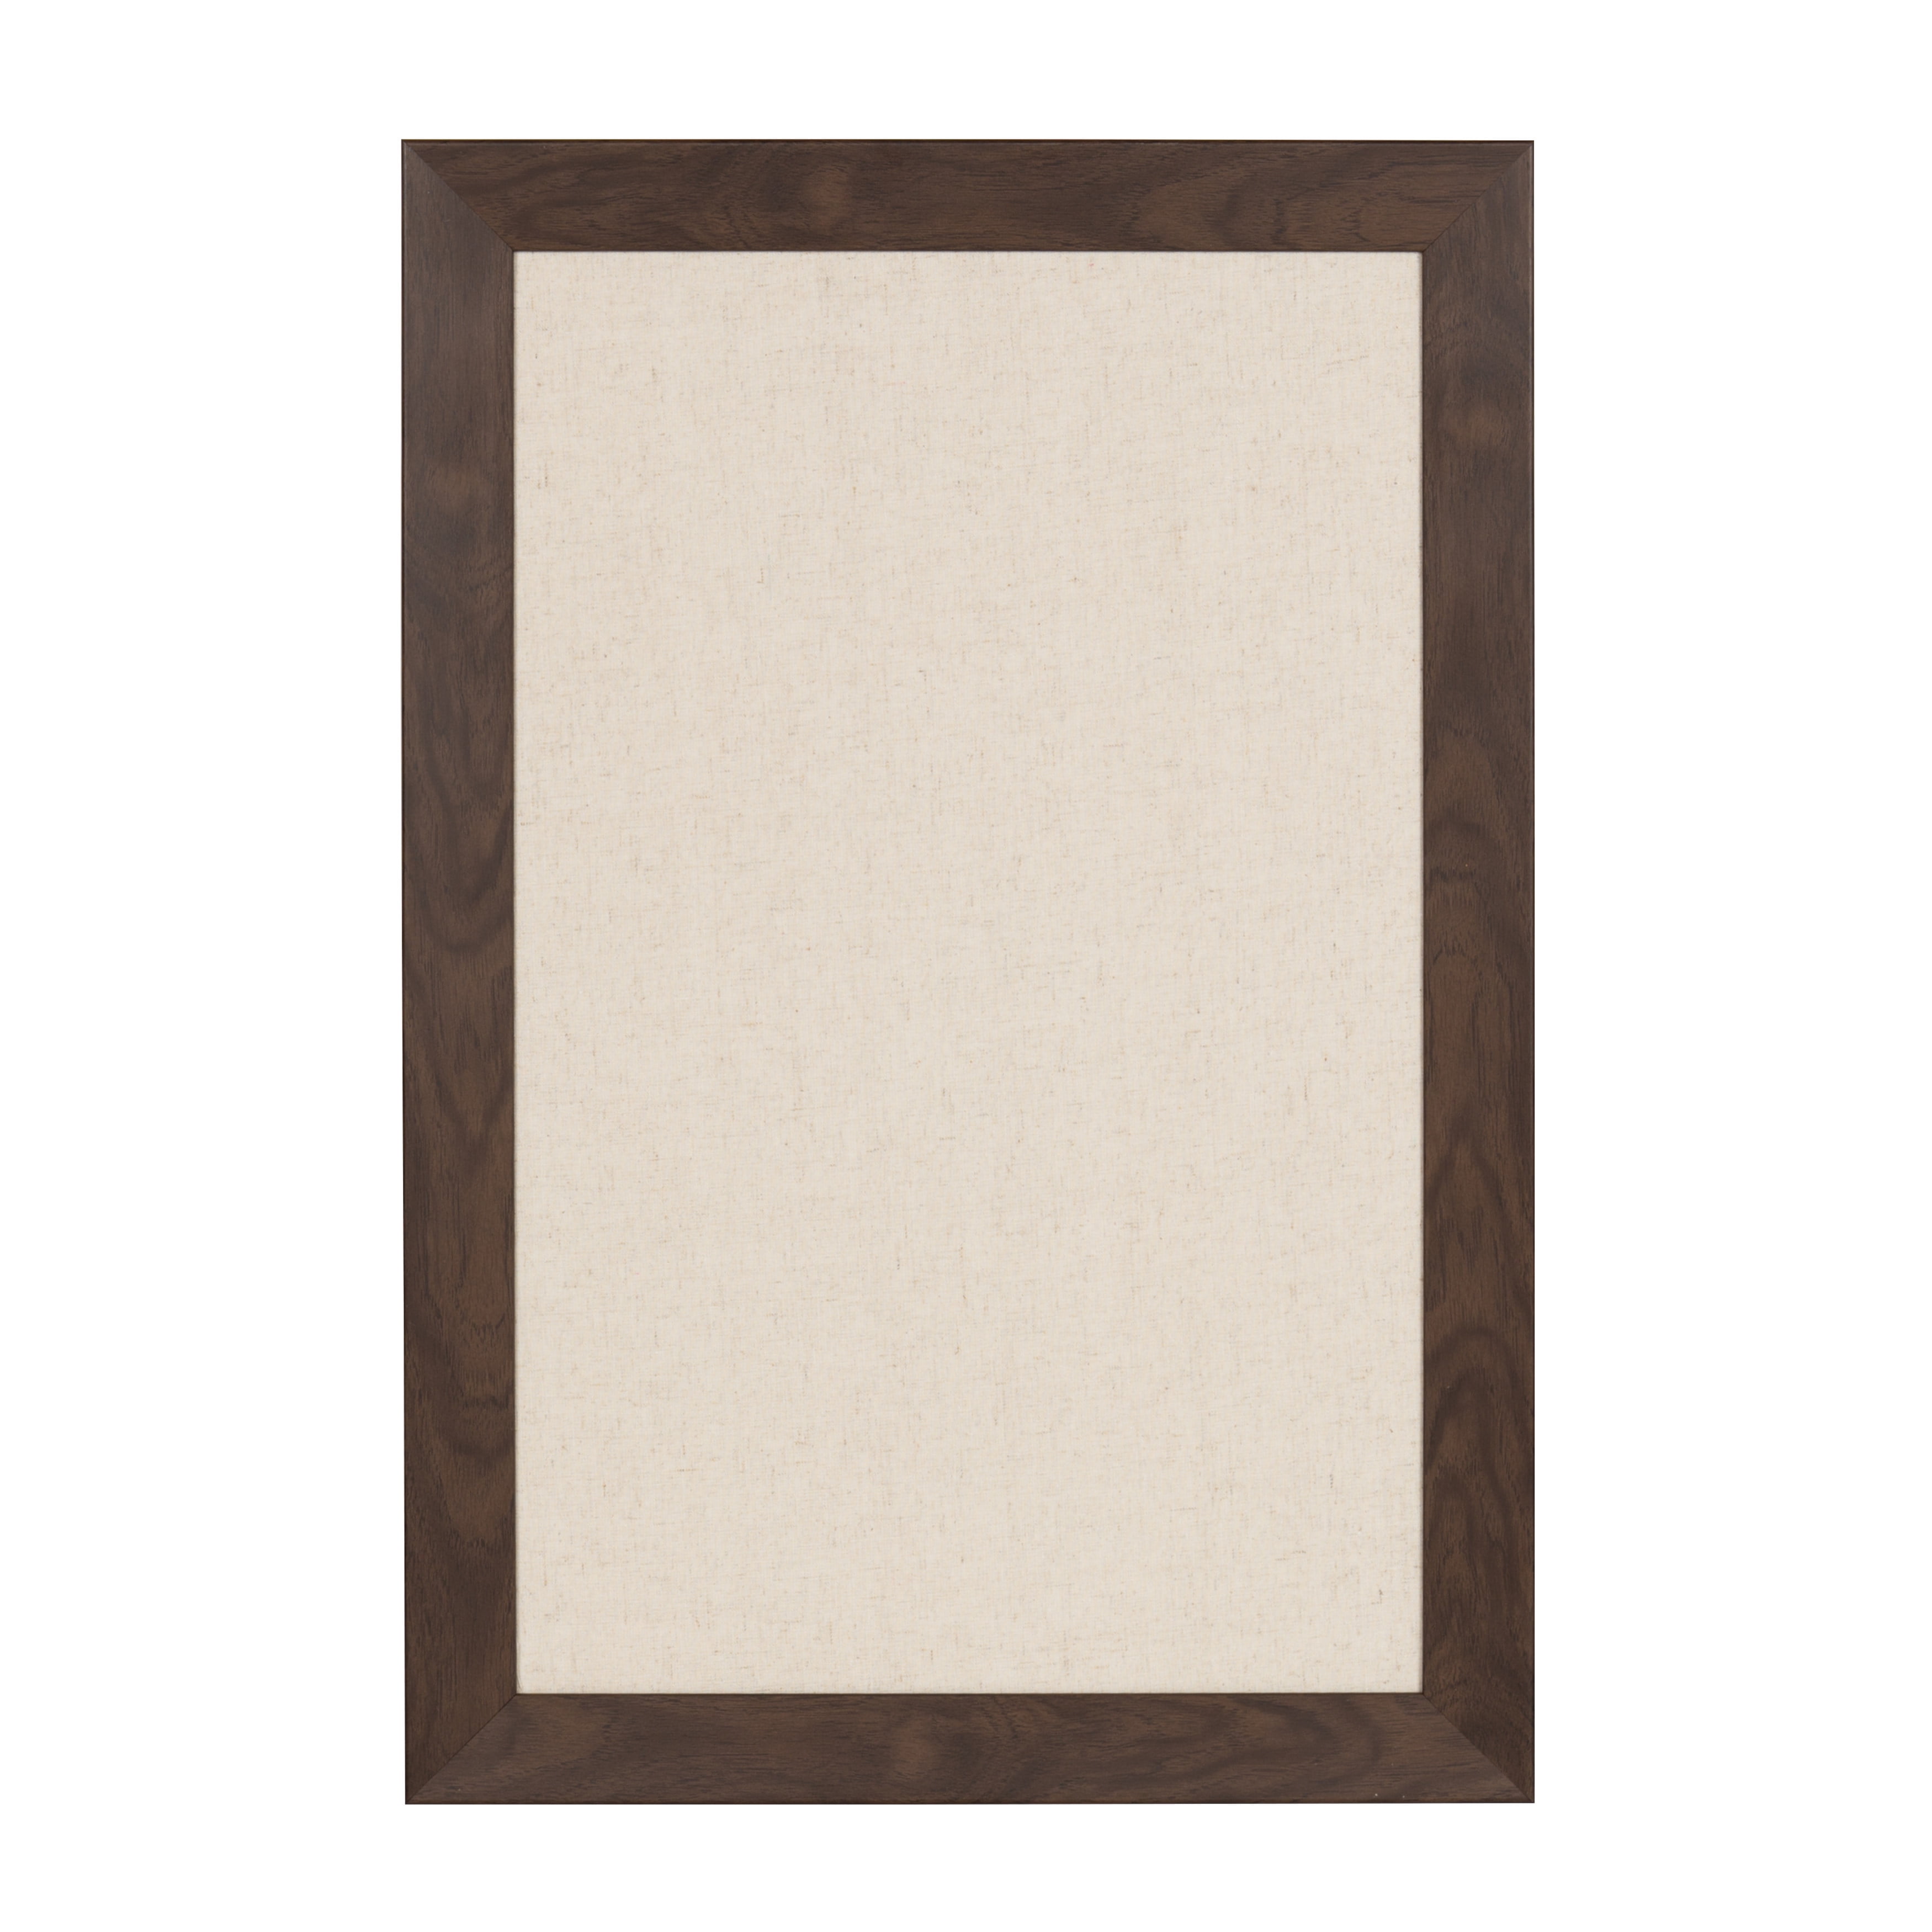 Kate and Laurel Macon Framed Linen Fabric Pinboard, 27x43, Rustic 